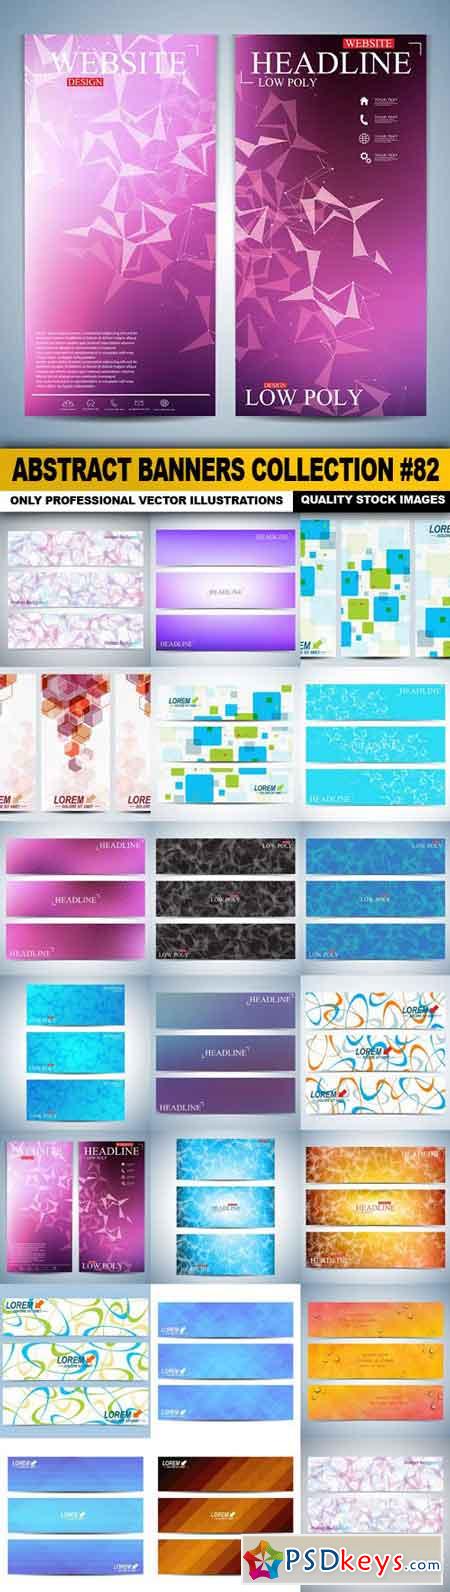 Abstract Banners Collection #82 - 20 Vectors